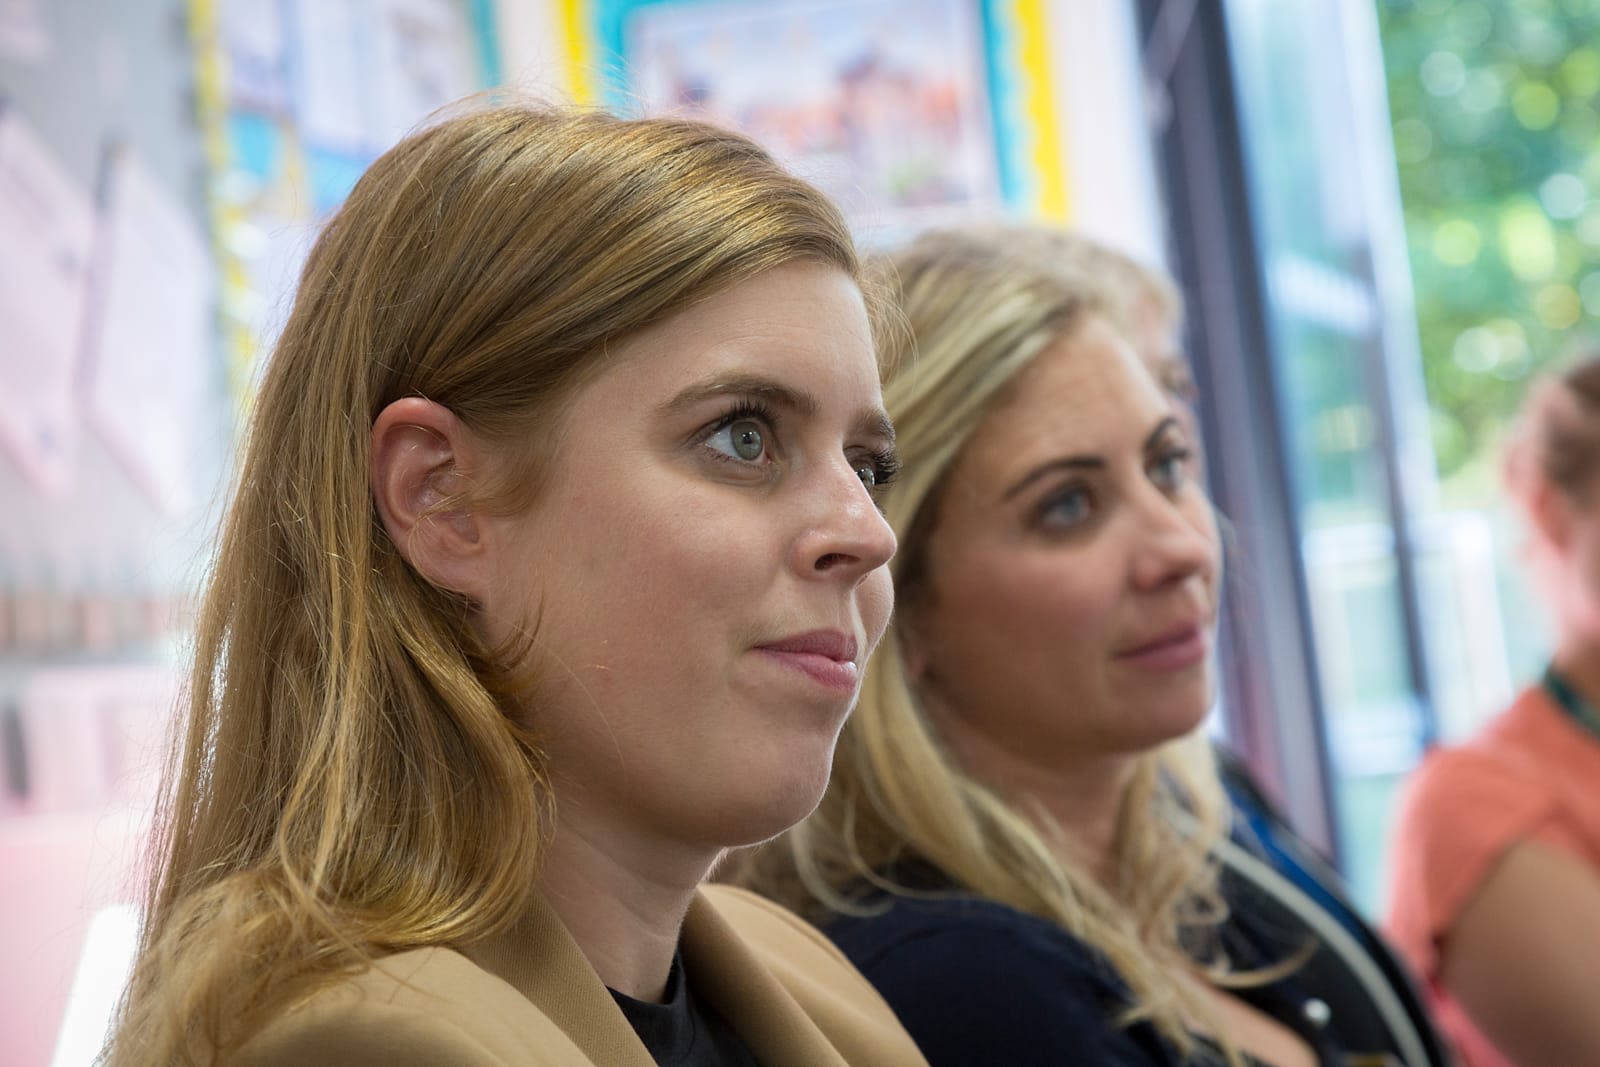 Holly Branson and Princess Beatrice at a Big Change event